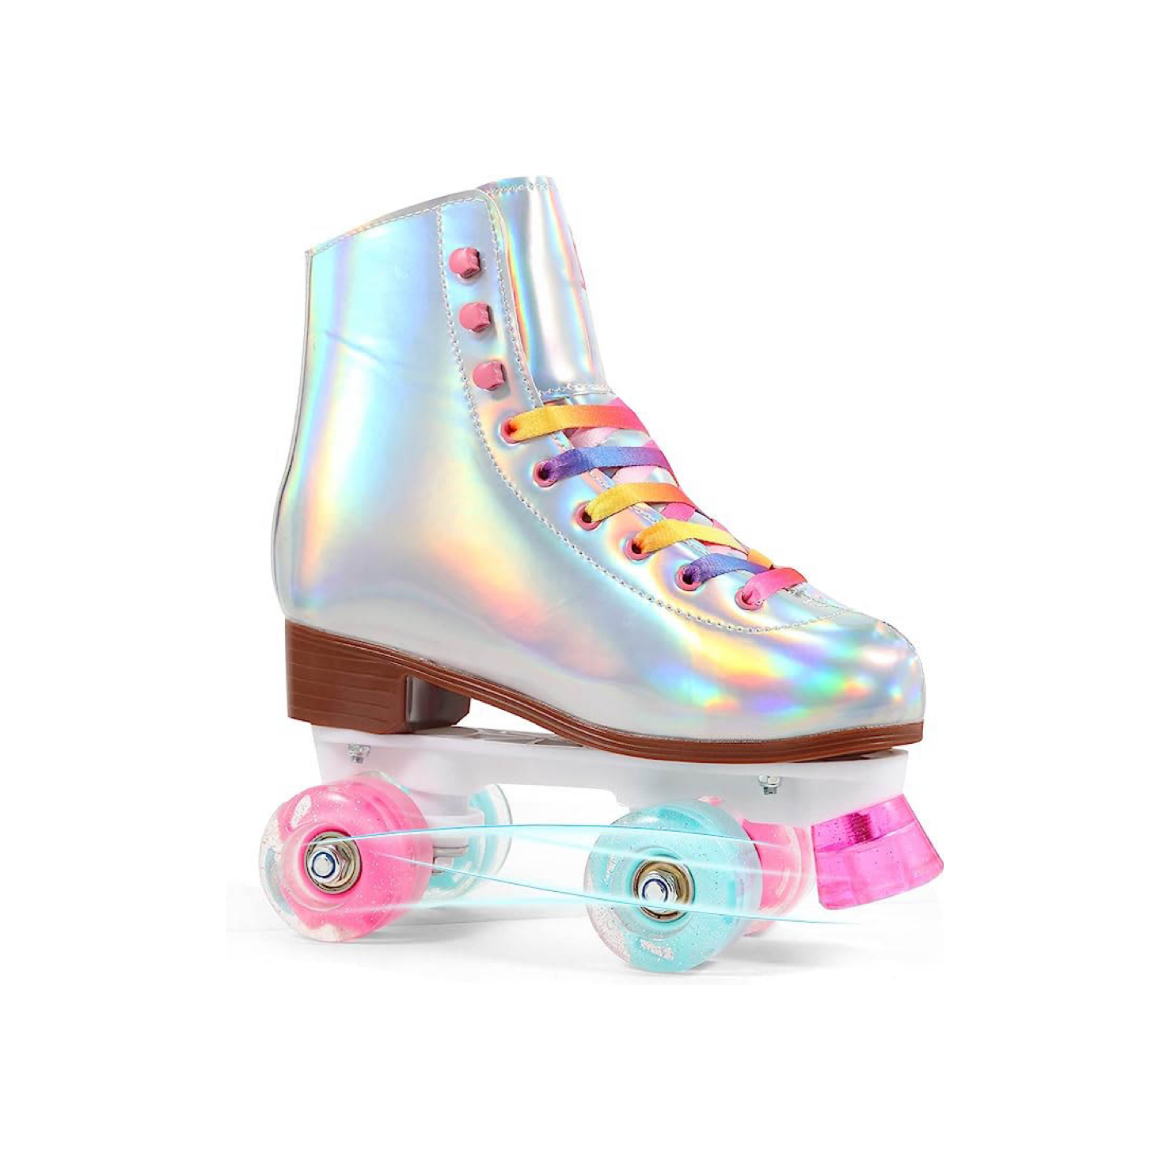 Four-wheeled Skates for Girls and Women All-wheeled Light Up